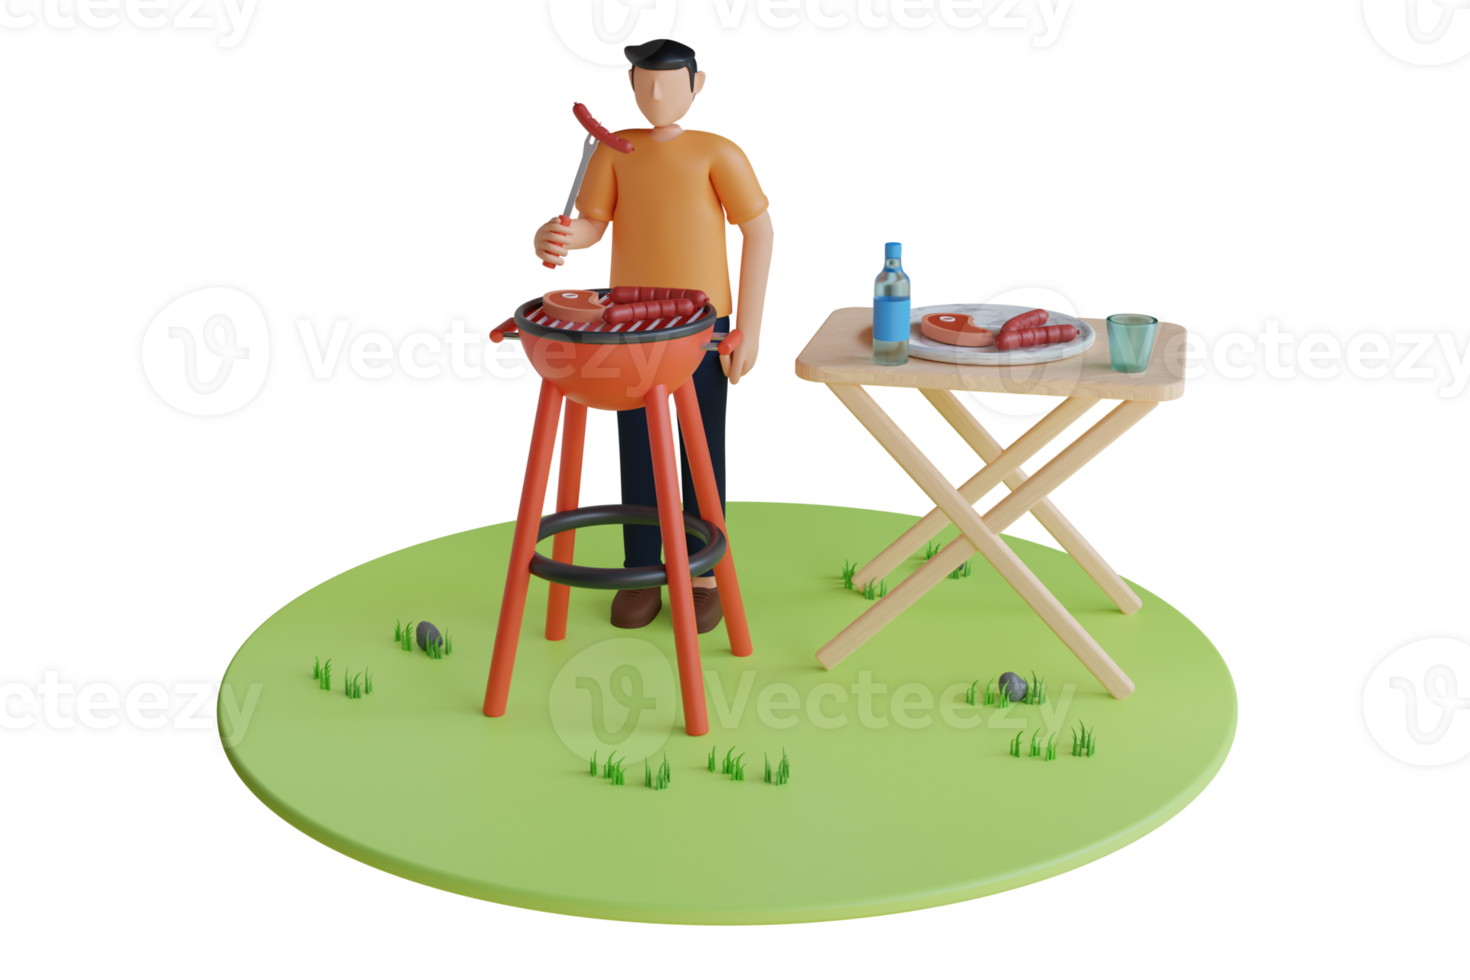 3D Illustration of man having a barbecue in nature. man enjoying a barbecue in the midst of nature, surrounded by lush greenery and a clear blue sky png